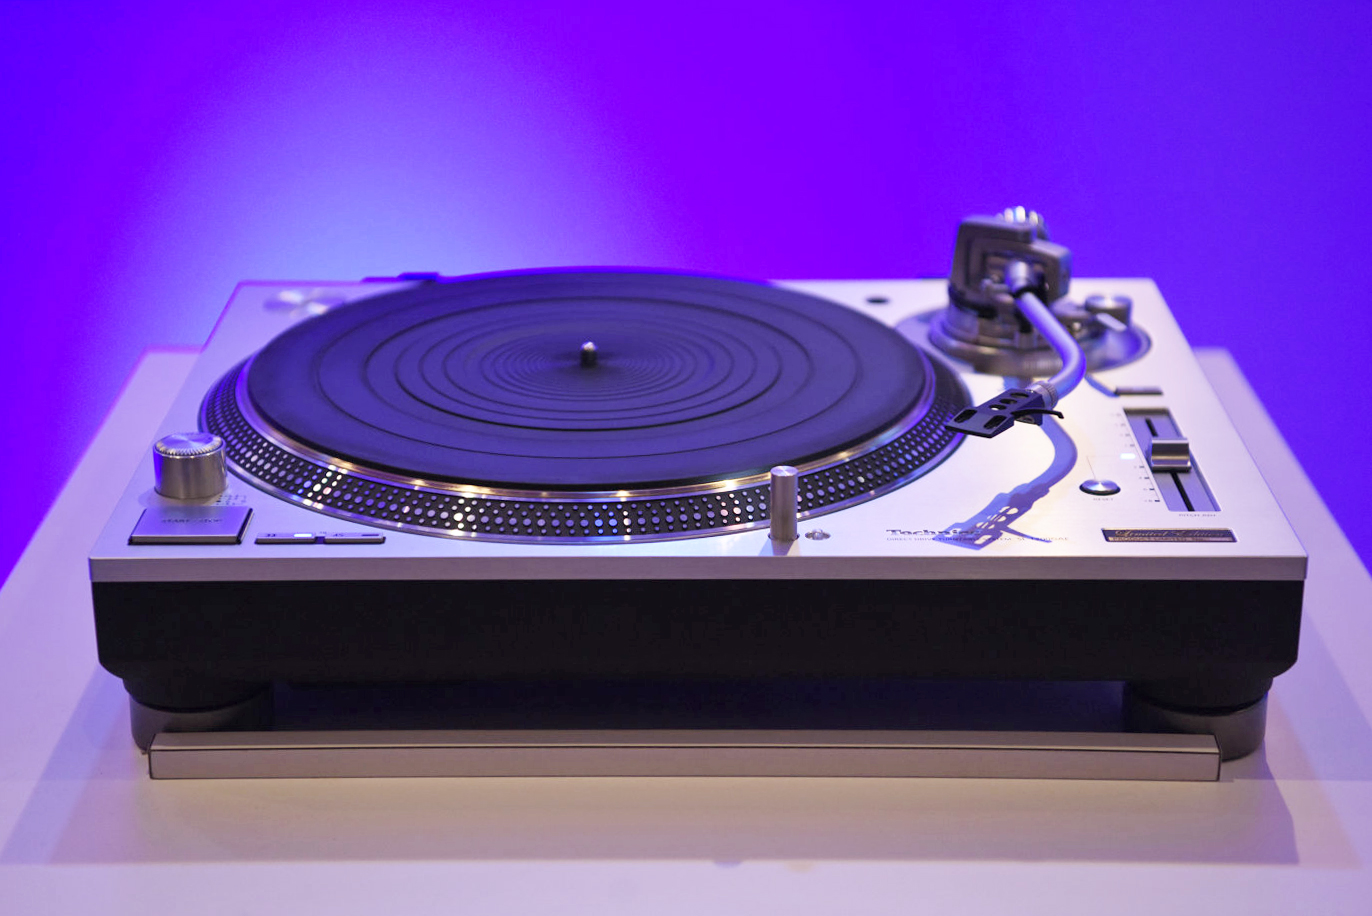 Technics explains why its new SL-1200 turntable costs $4,000